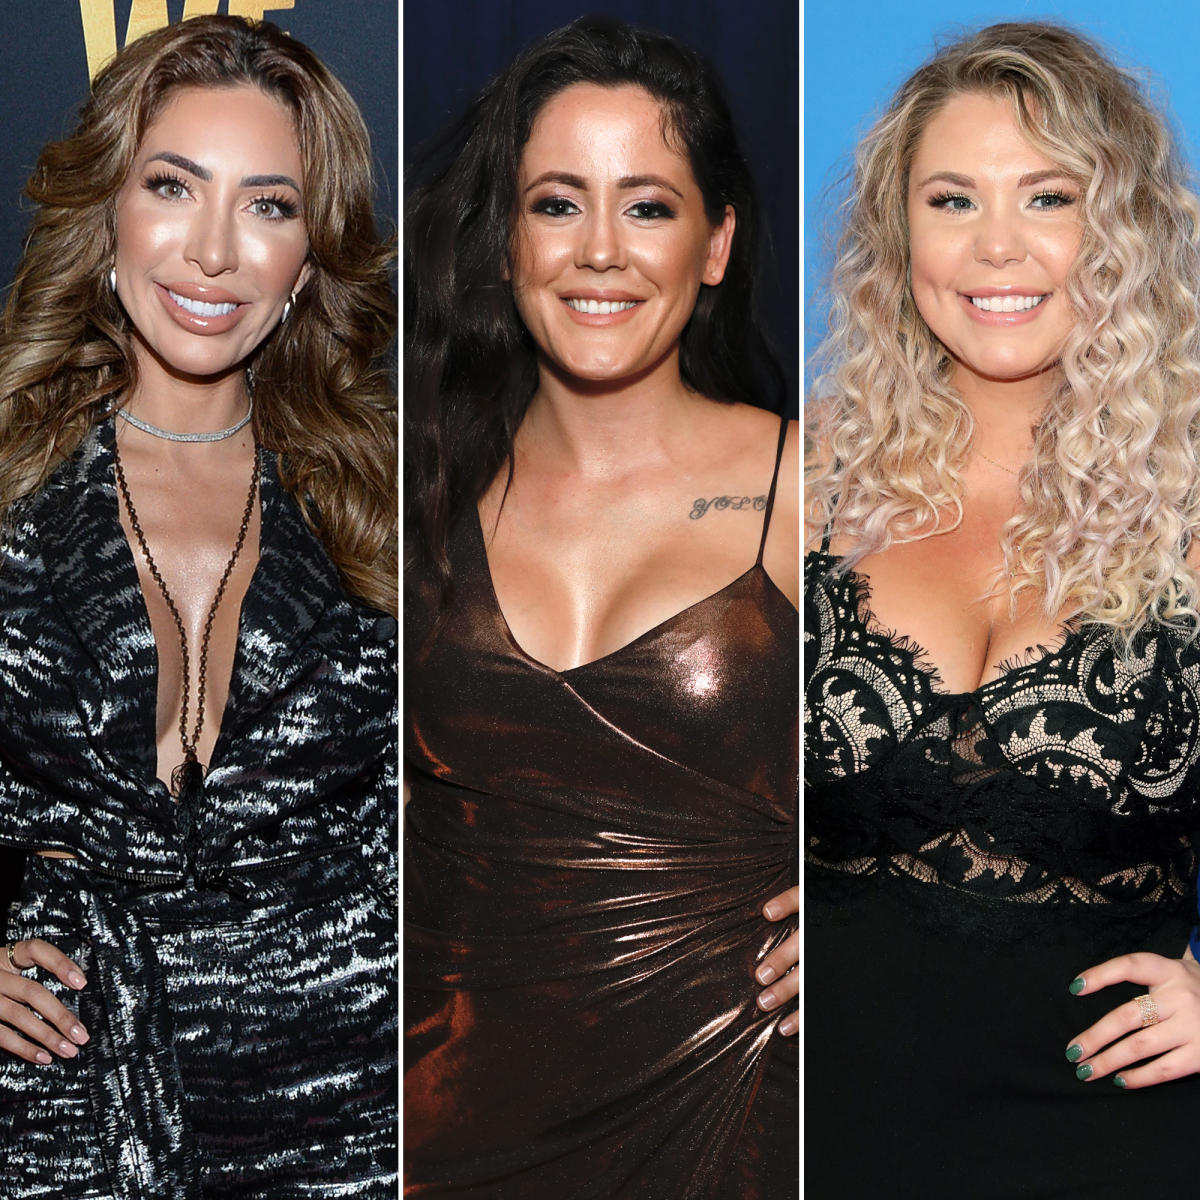 Mark Ashley Schoolgirl - The Biggest 'Teen Mom' Feuds in the Franchise: Kailyn Lowry and Briana  DeJesus, Amber Portwood and Ashley Jones and More